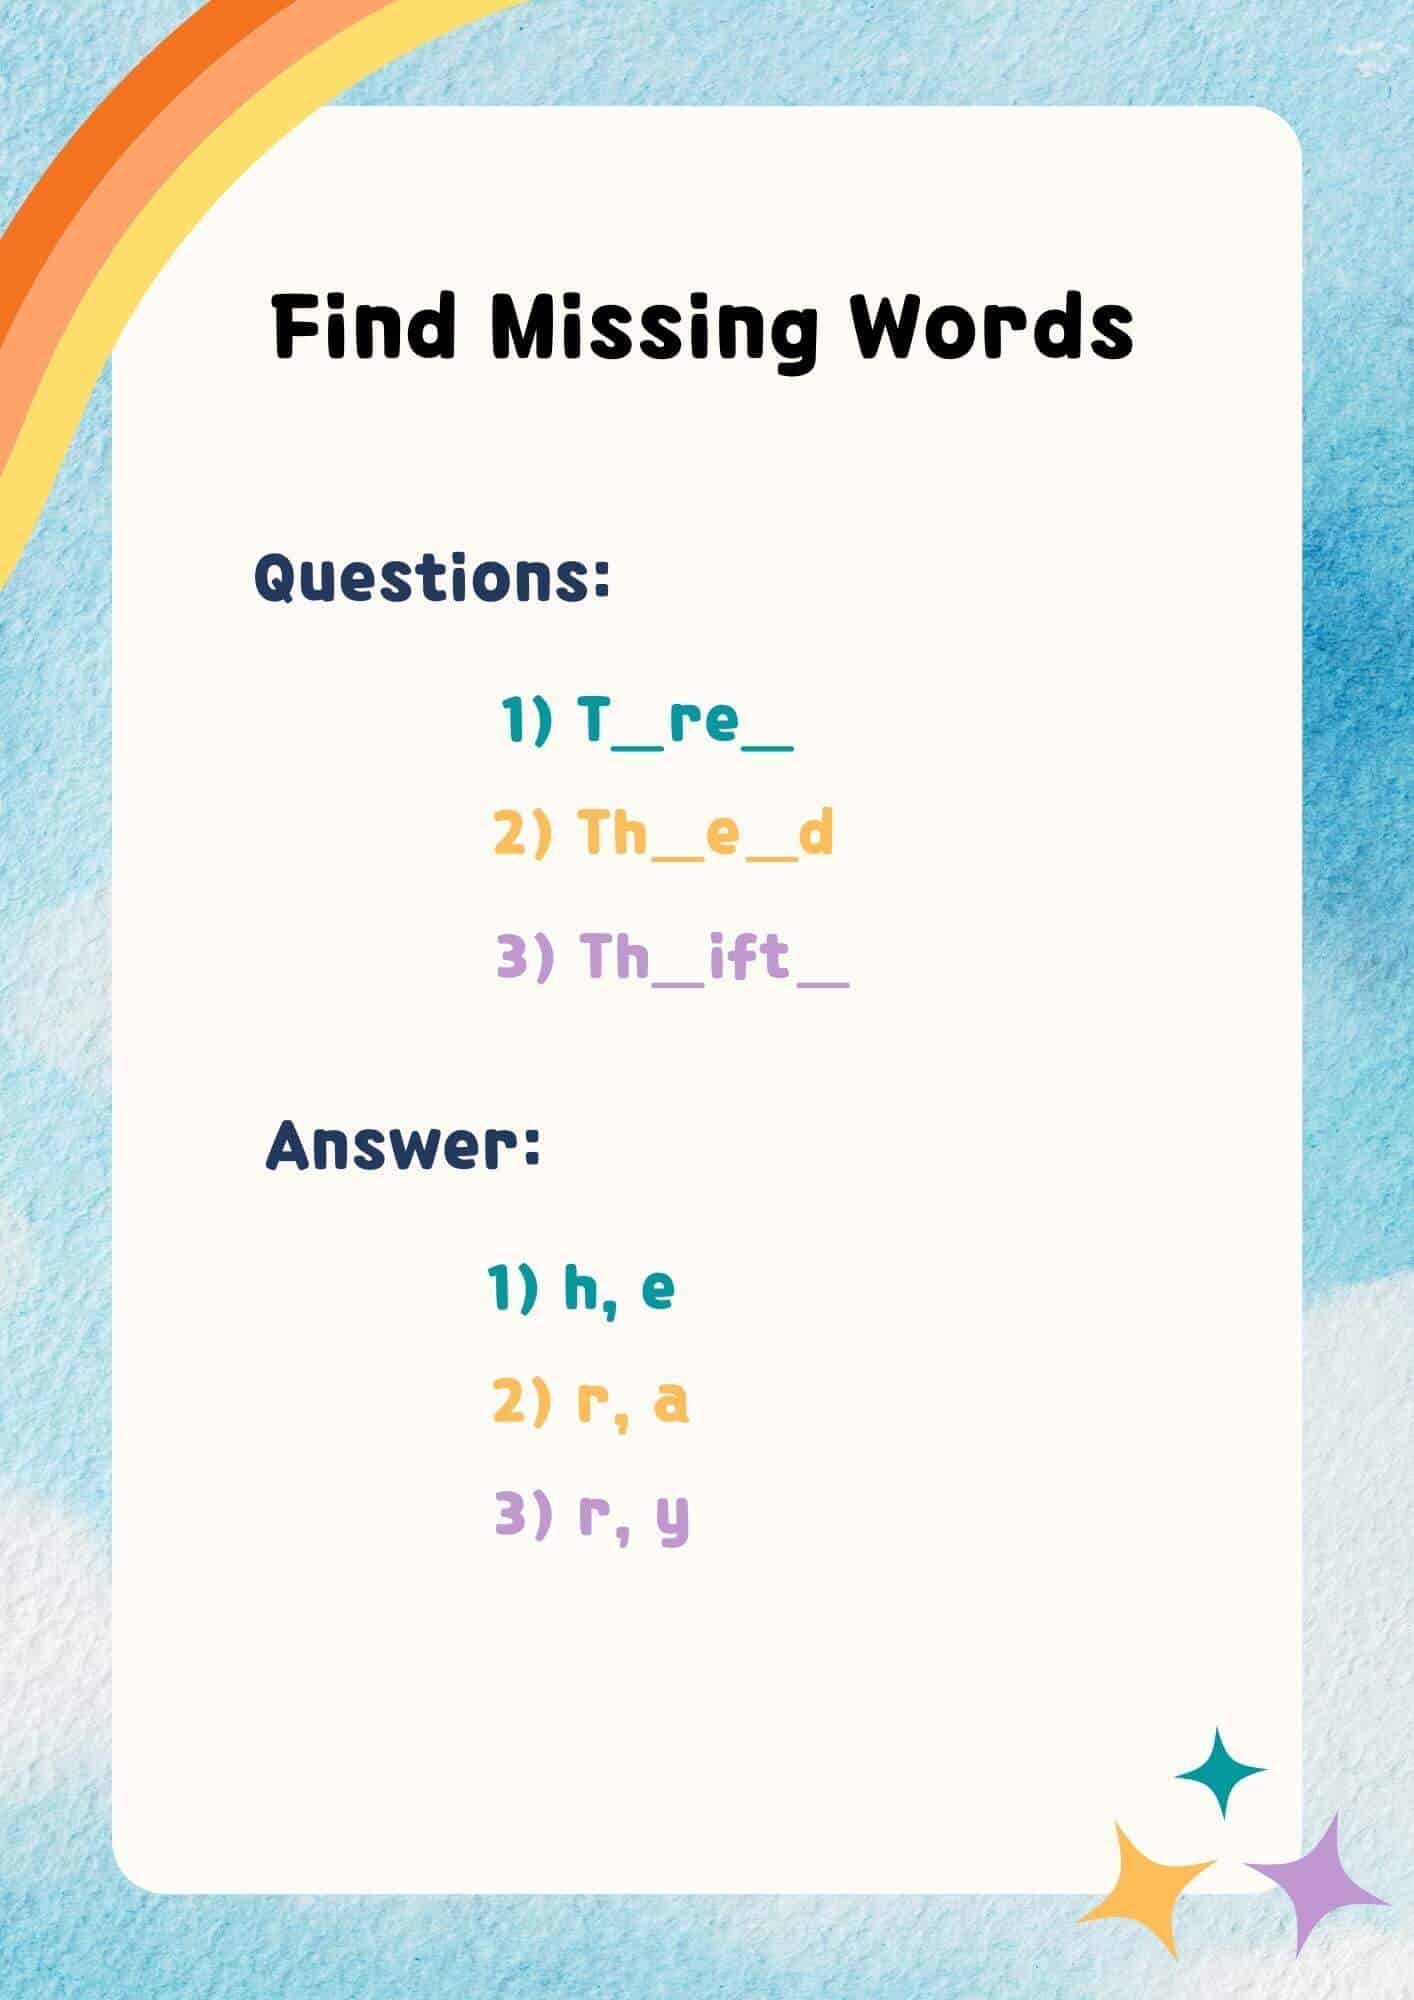 Find missing words to know thr words